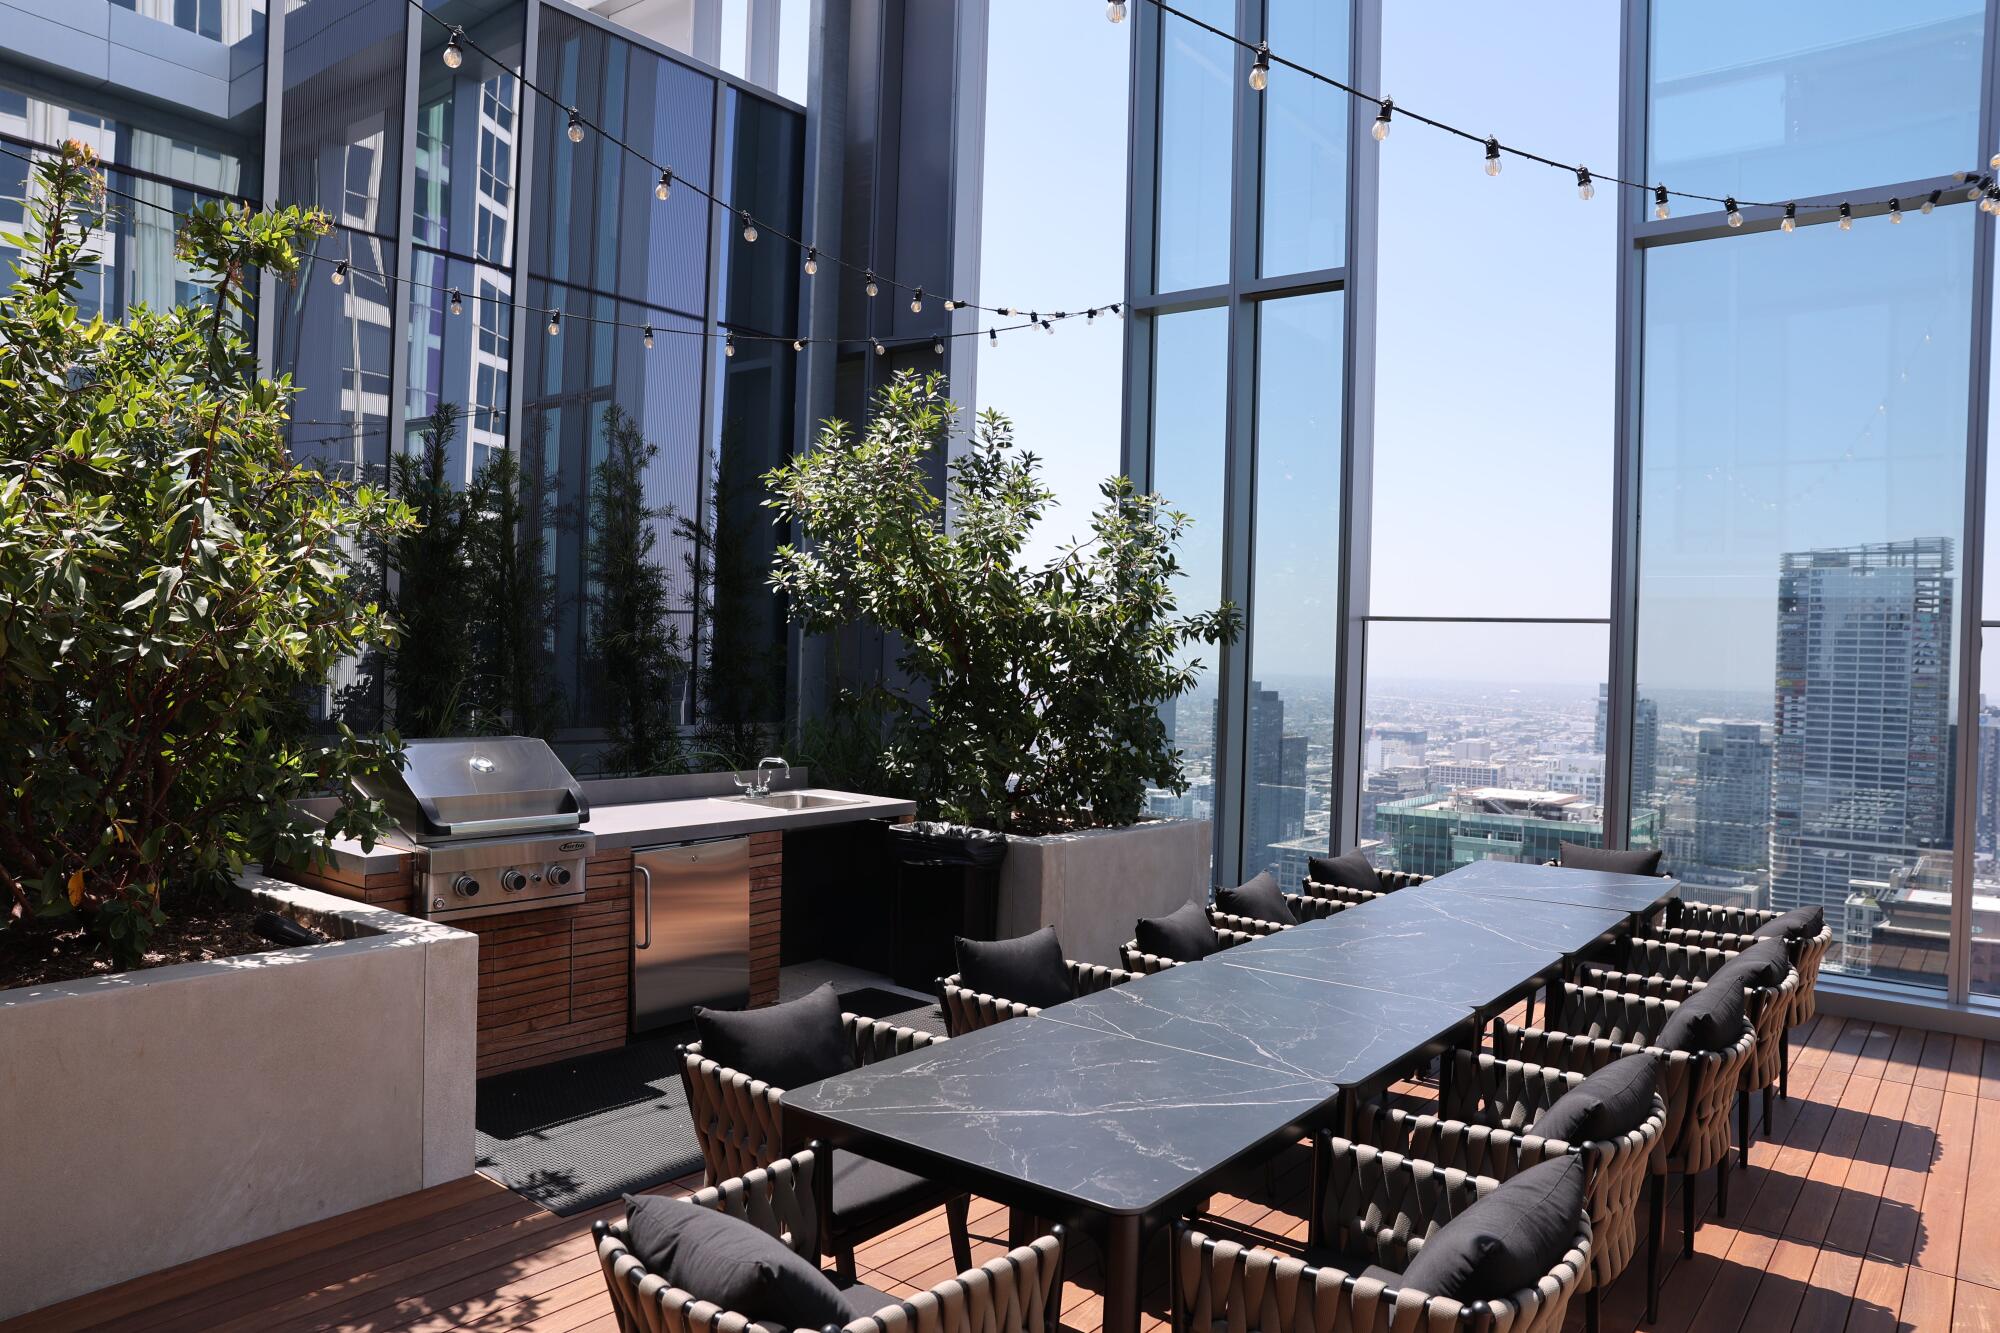 View of downtown buildings from a rooftop patio on the 41st floor of Figueroa Eight.